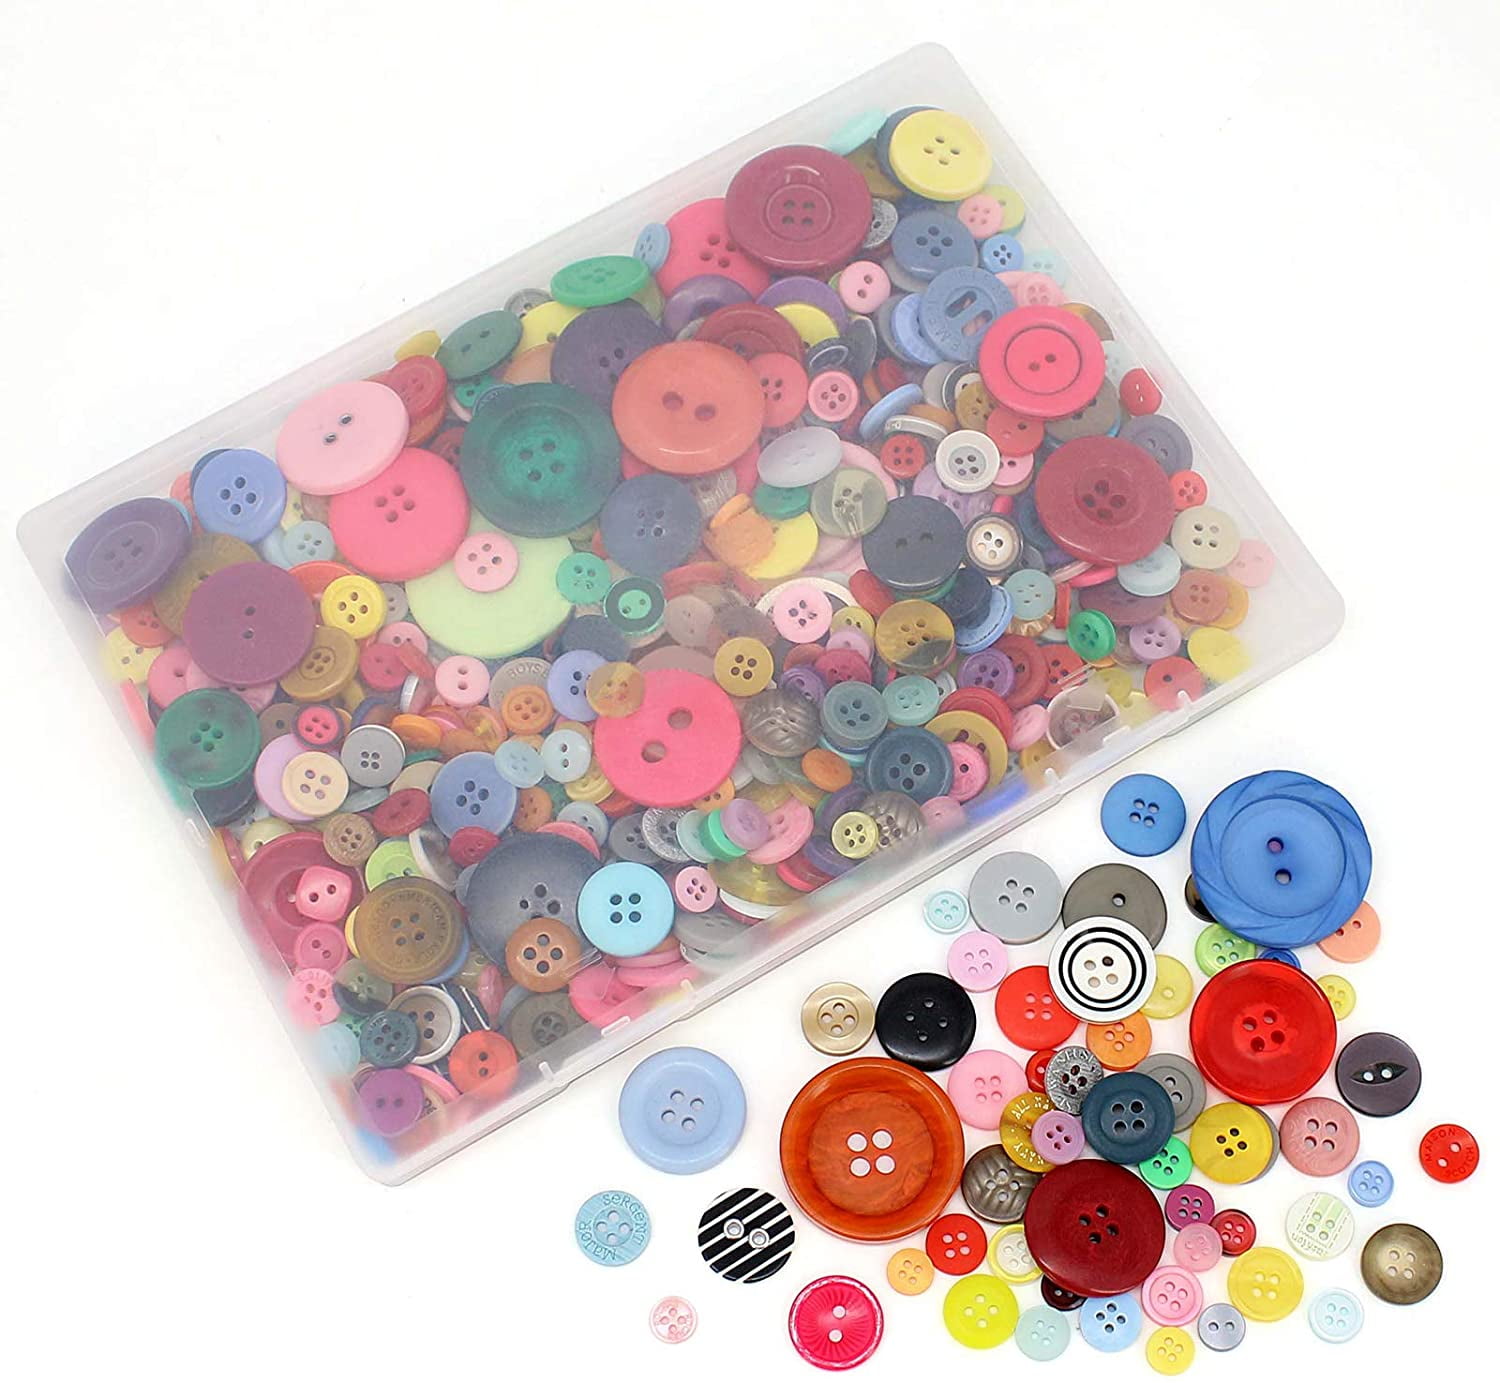 Buttonsmini Crafts Colorful Tiny Assorted Sewing Small Fancy DIY Button Materials Christmas, Size: 1.5X1.5CM